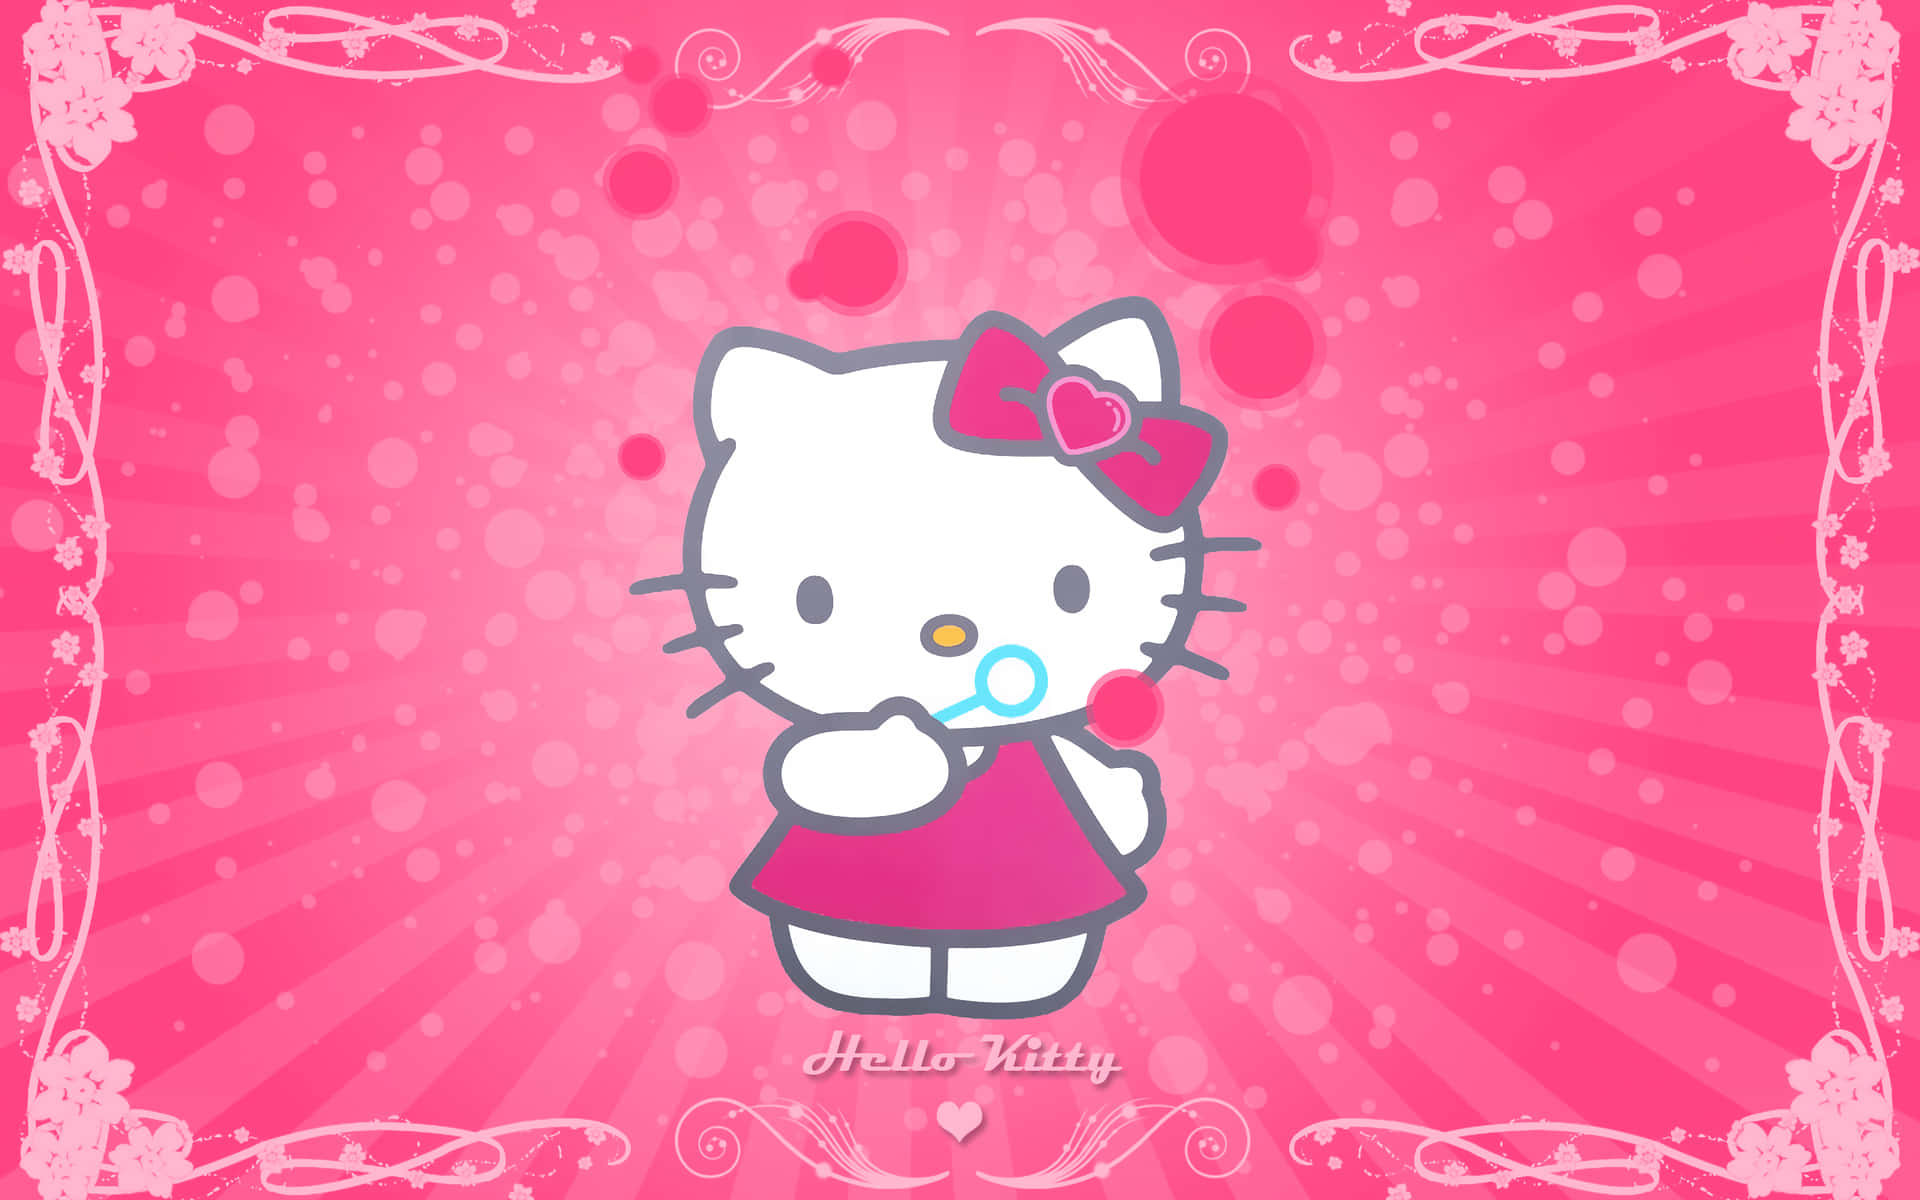 Cute Pink Hello Kitty Blowing Bubbles Background